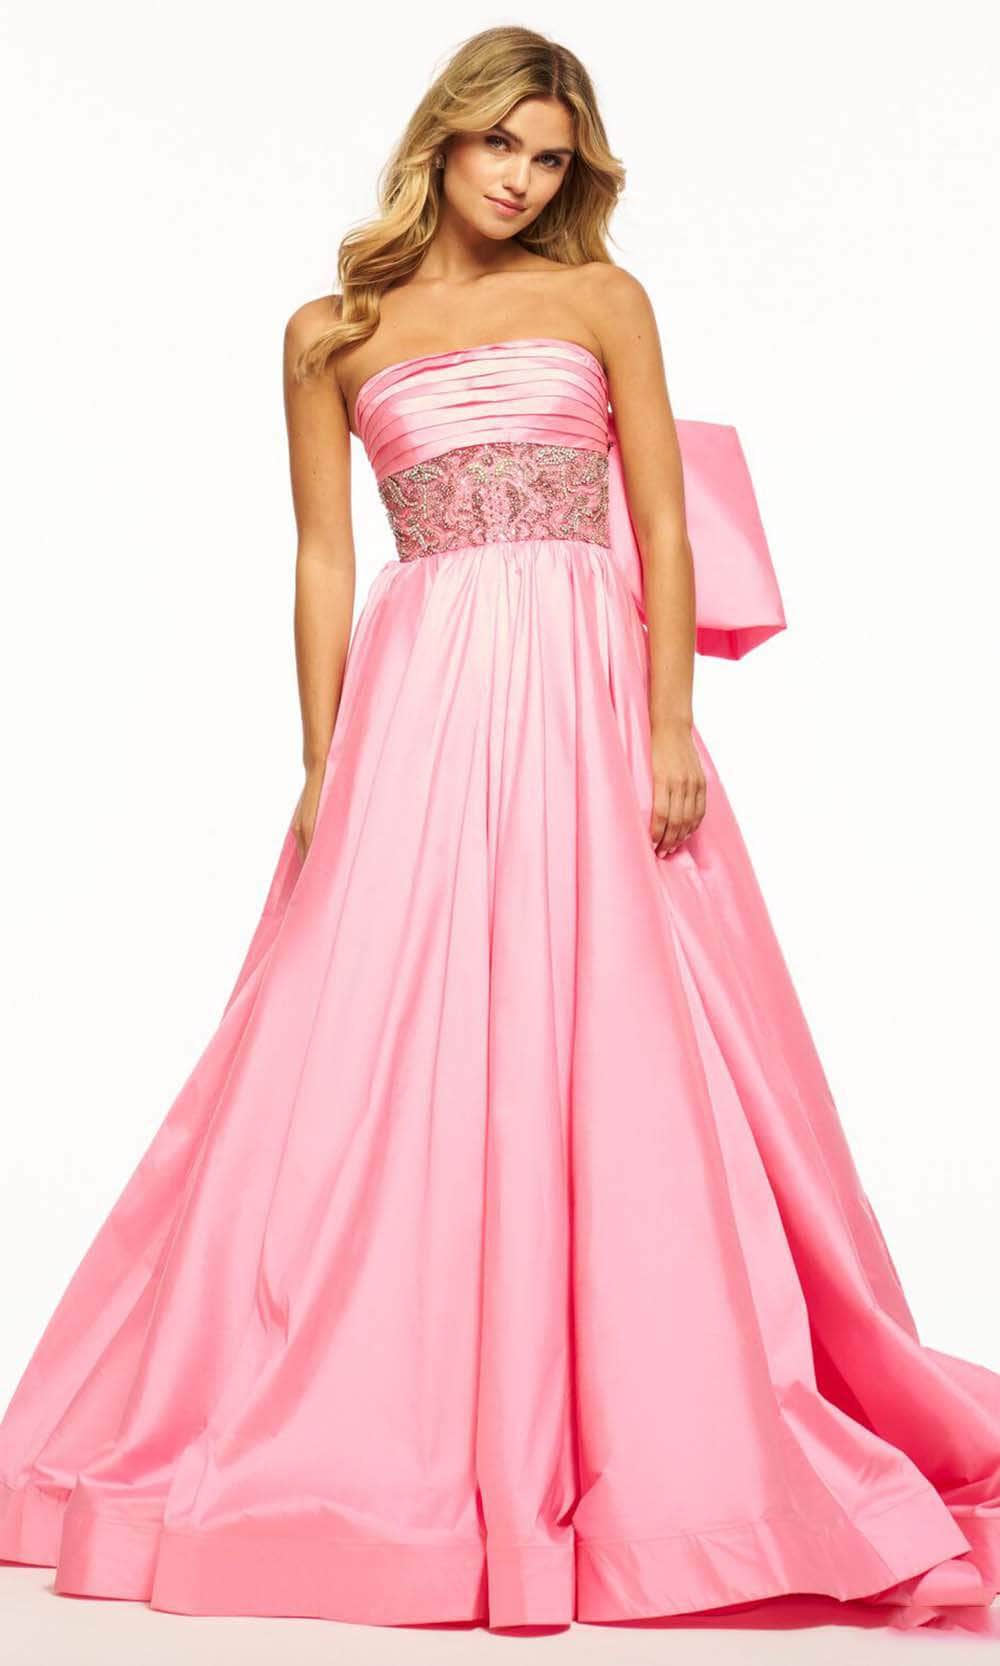 Image of Sherri Hill 56016 - Strapless Beaded Waistband Prom Gown